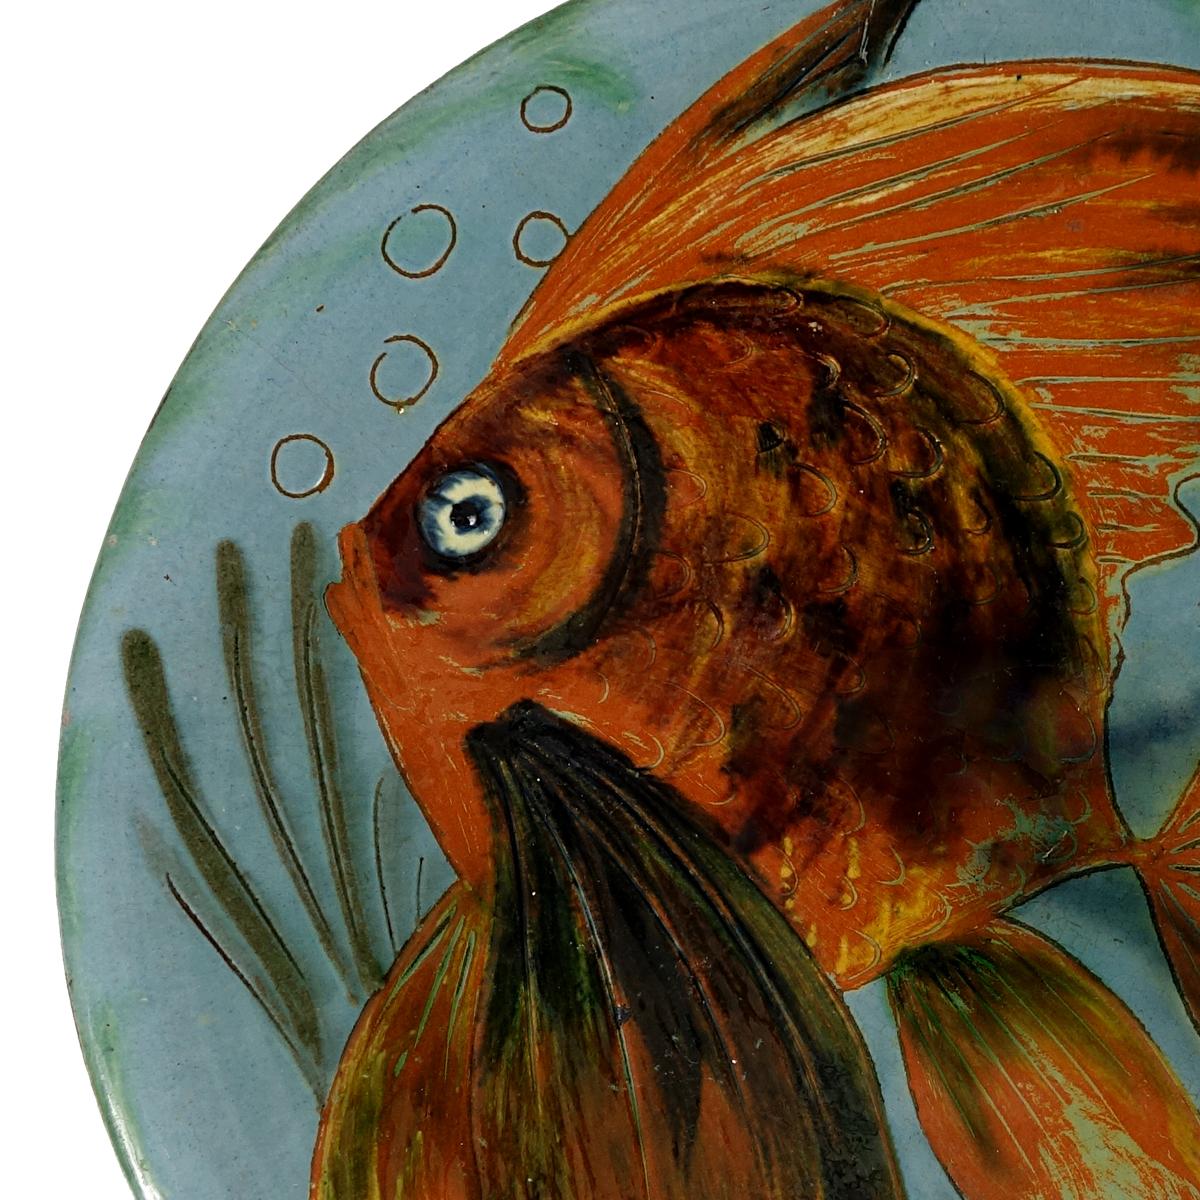 Mid-Century Modern Ceramic Wall Plate with Fish Decor Signed by Spanish Maker Puigdemont For Sale